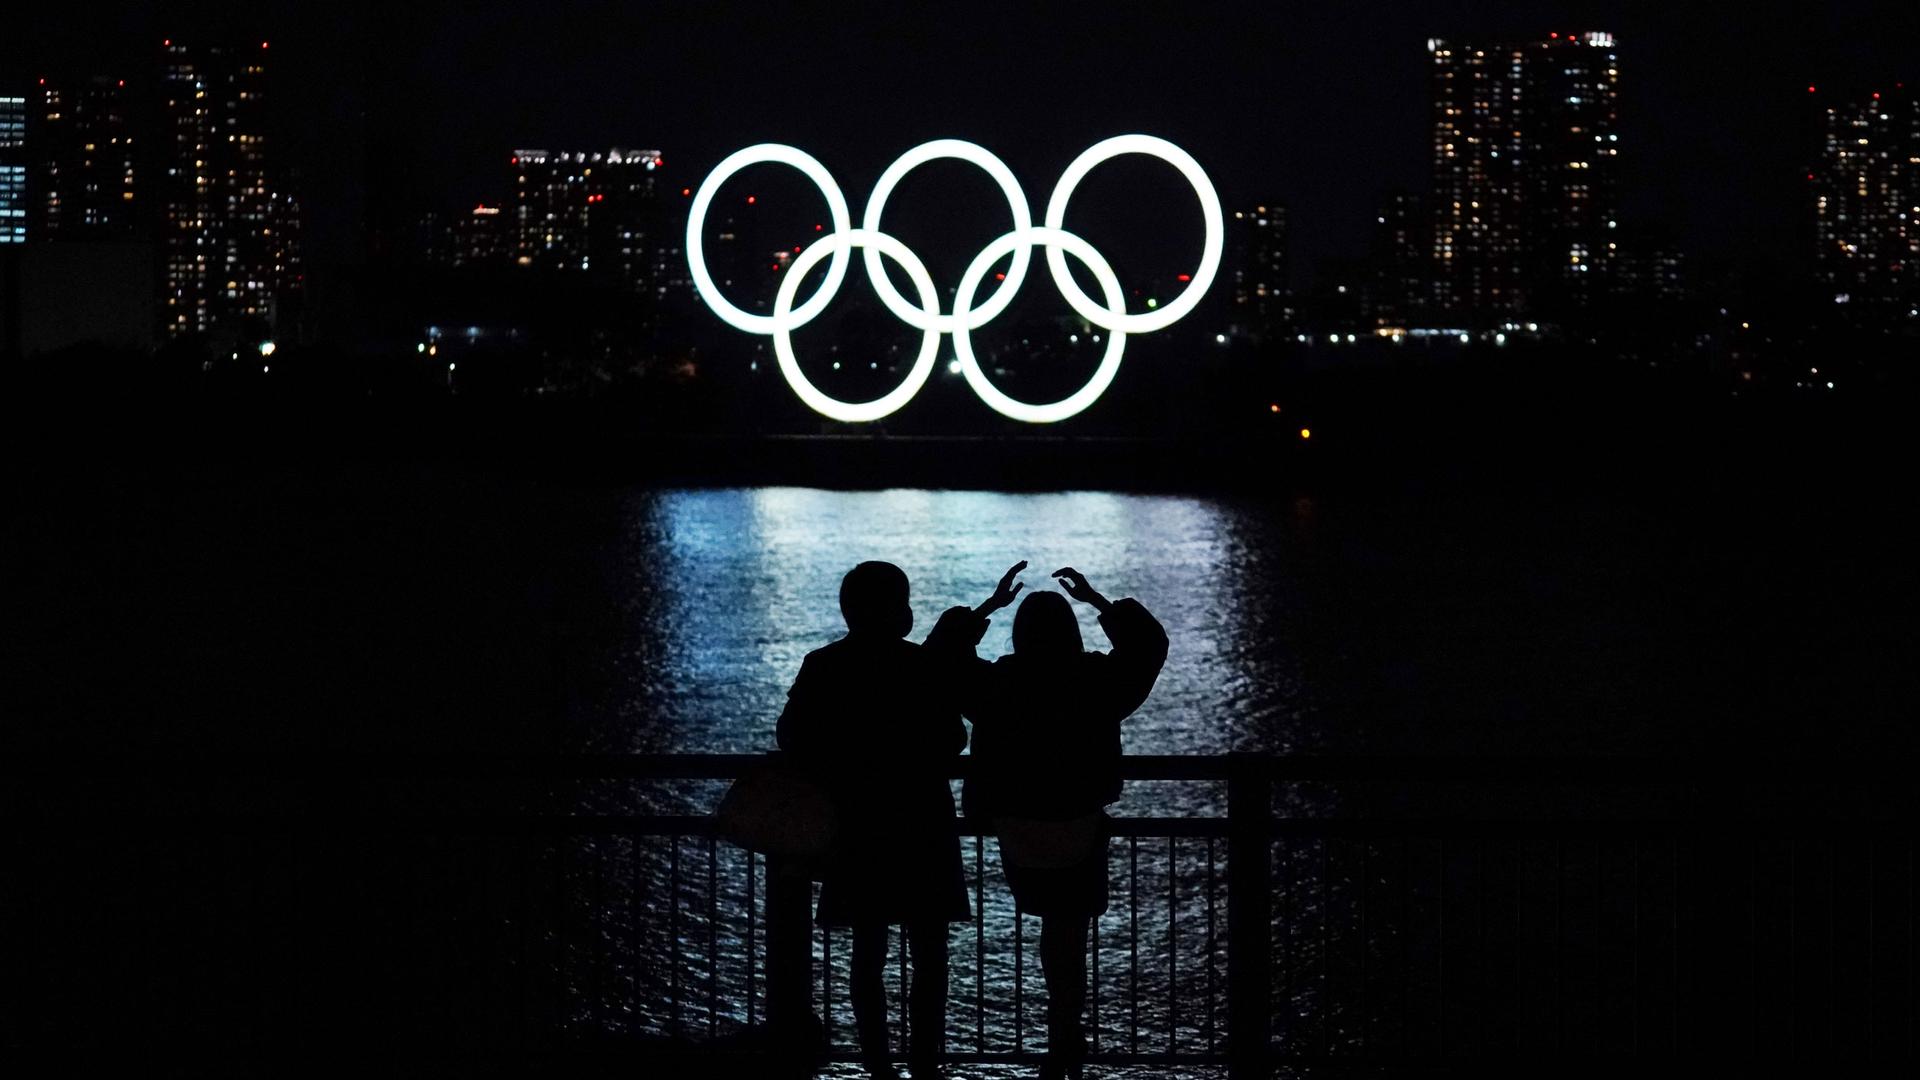 Two people are shown standing at a railing next to a body of water where the Olympic rings are in the destance illuminated in white.